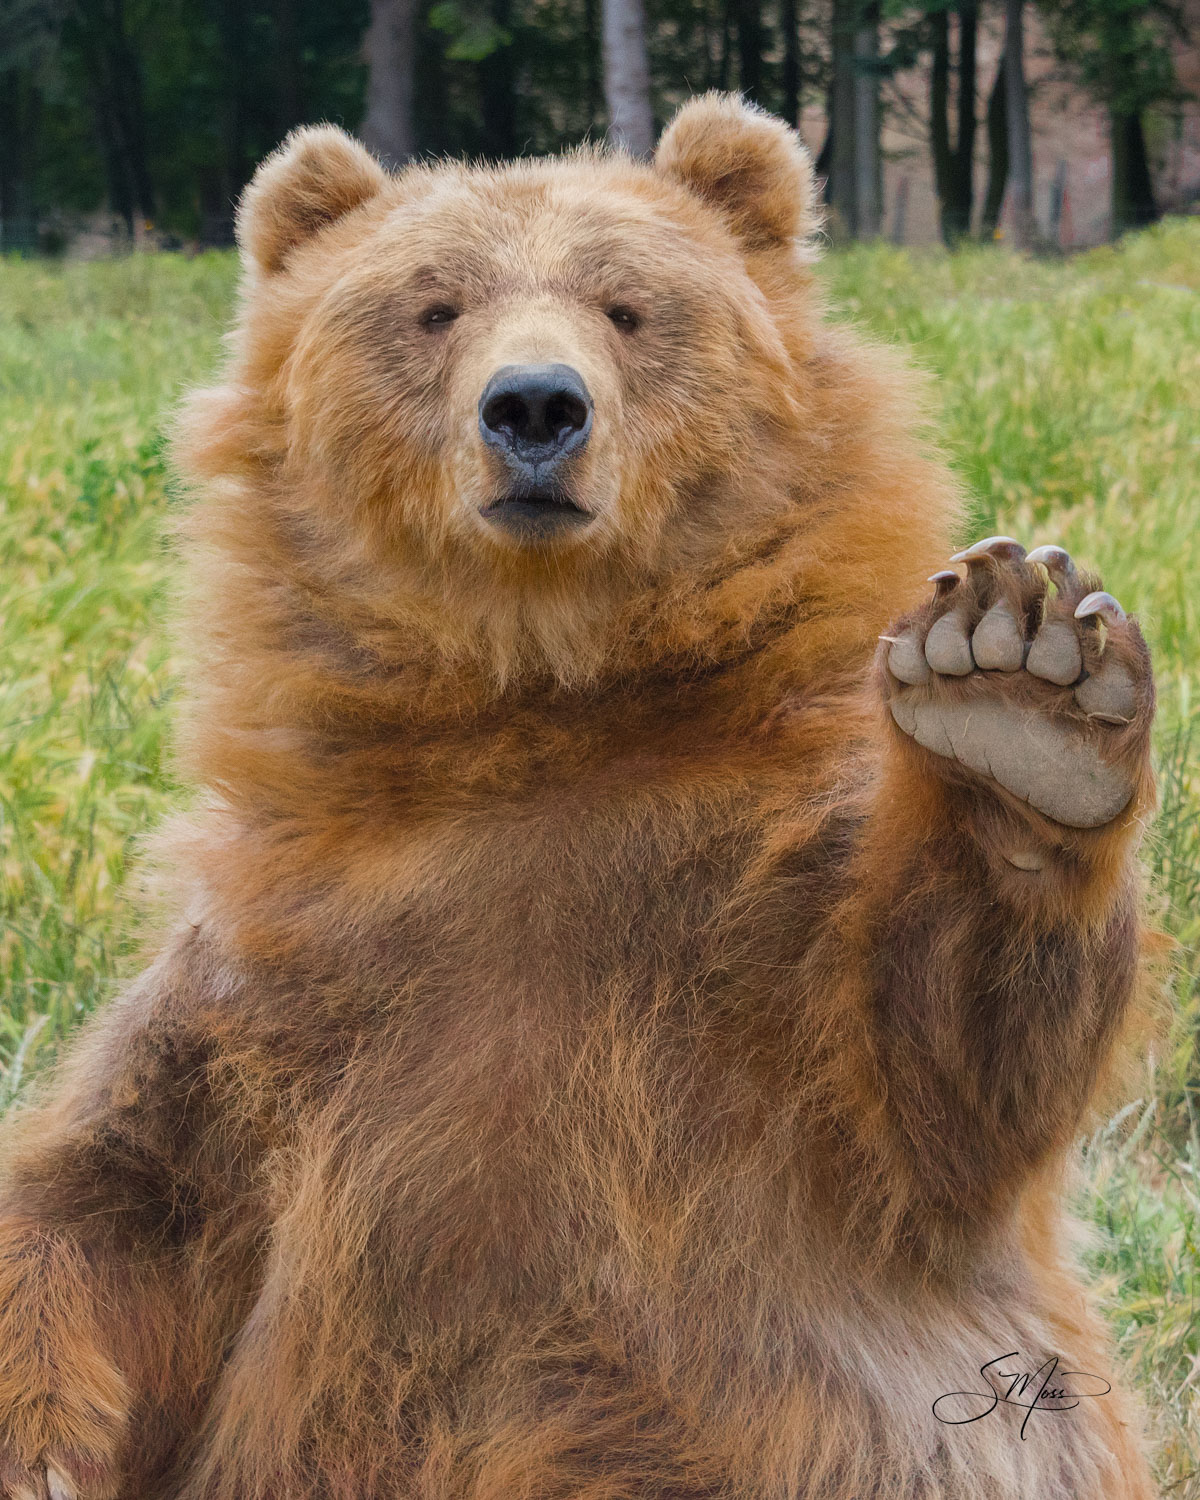 Bear, Olympic Game Park, Large animal, wildlife, nature wild animals, brown bear, Suncadia, waving, hello, paw up, claws, smiling...